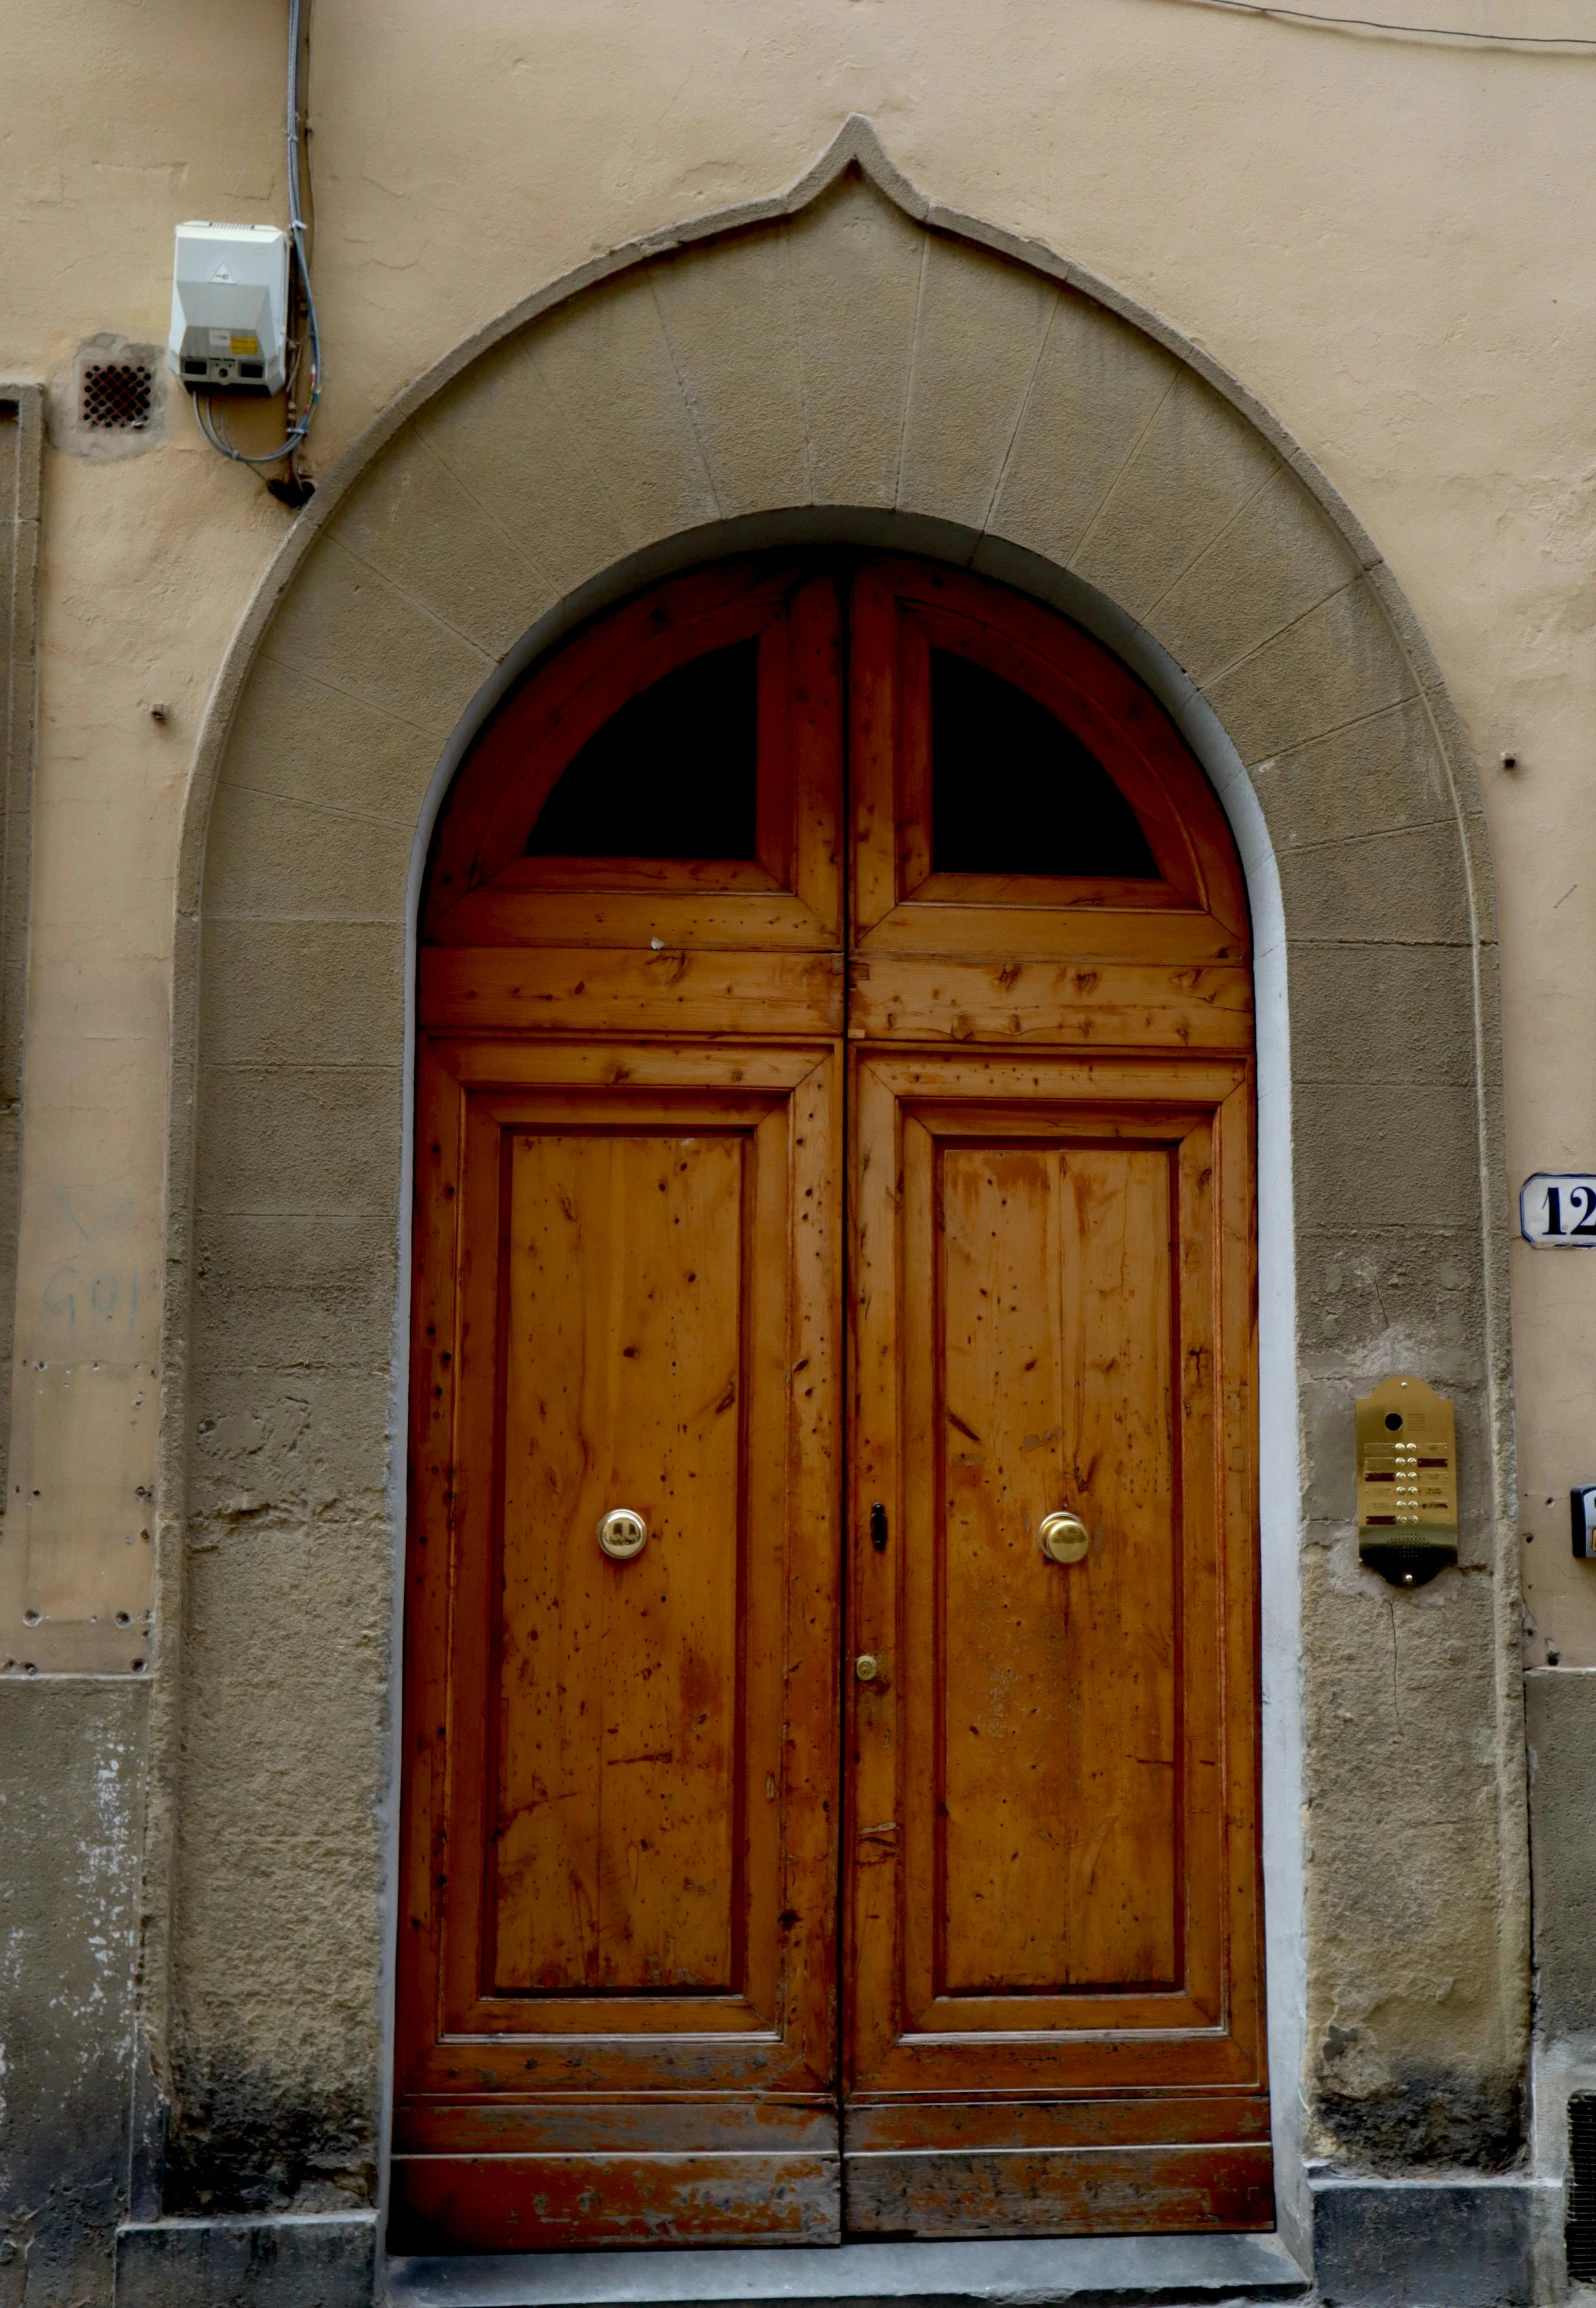 two brown doors in front of an arched entry